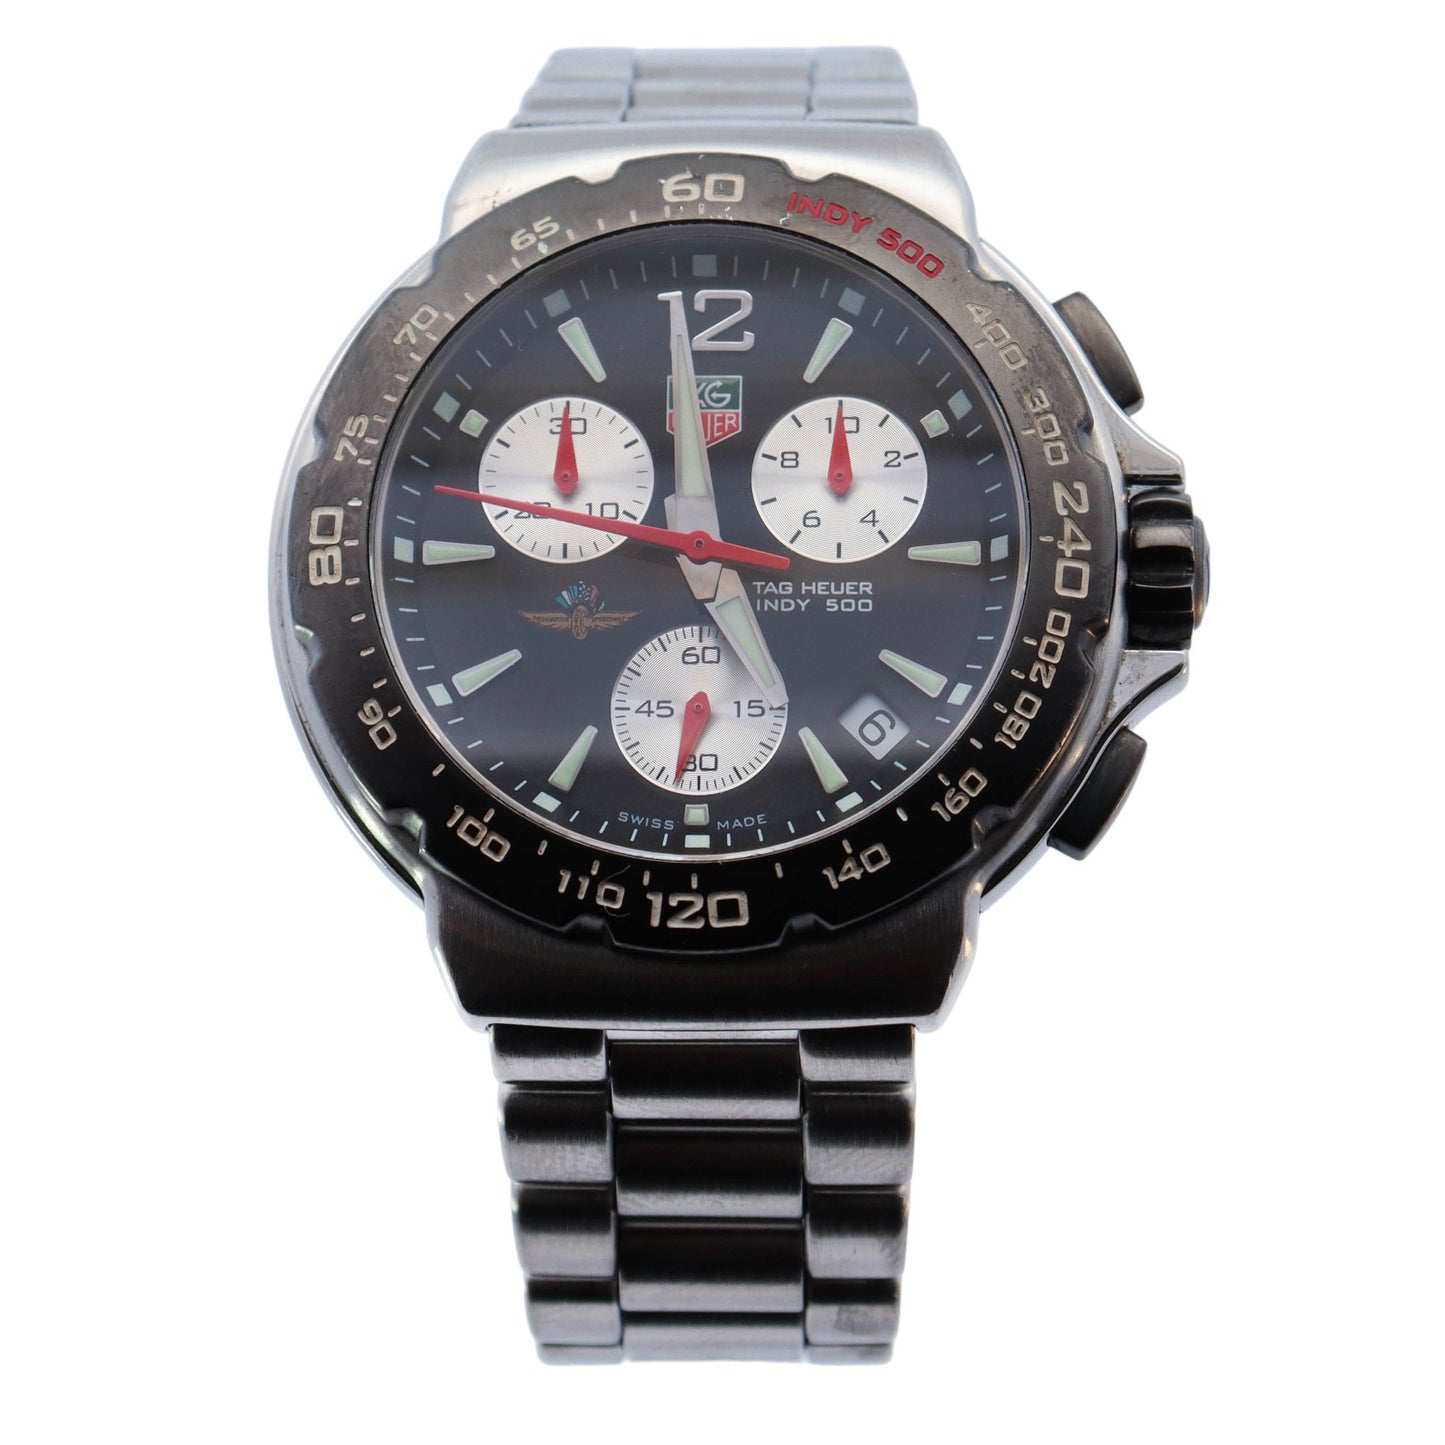 Tag Heuer Formula 1 Quartz Indy 500 Stainless Steel 41mm Black Chronograph Dial Watch Reference# CAC111A.BA0850